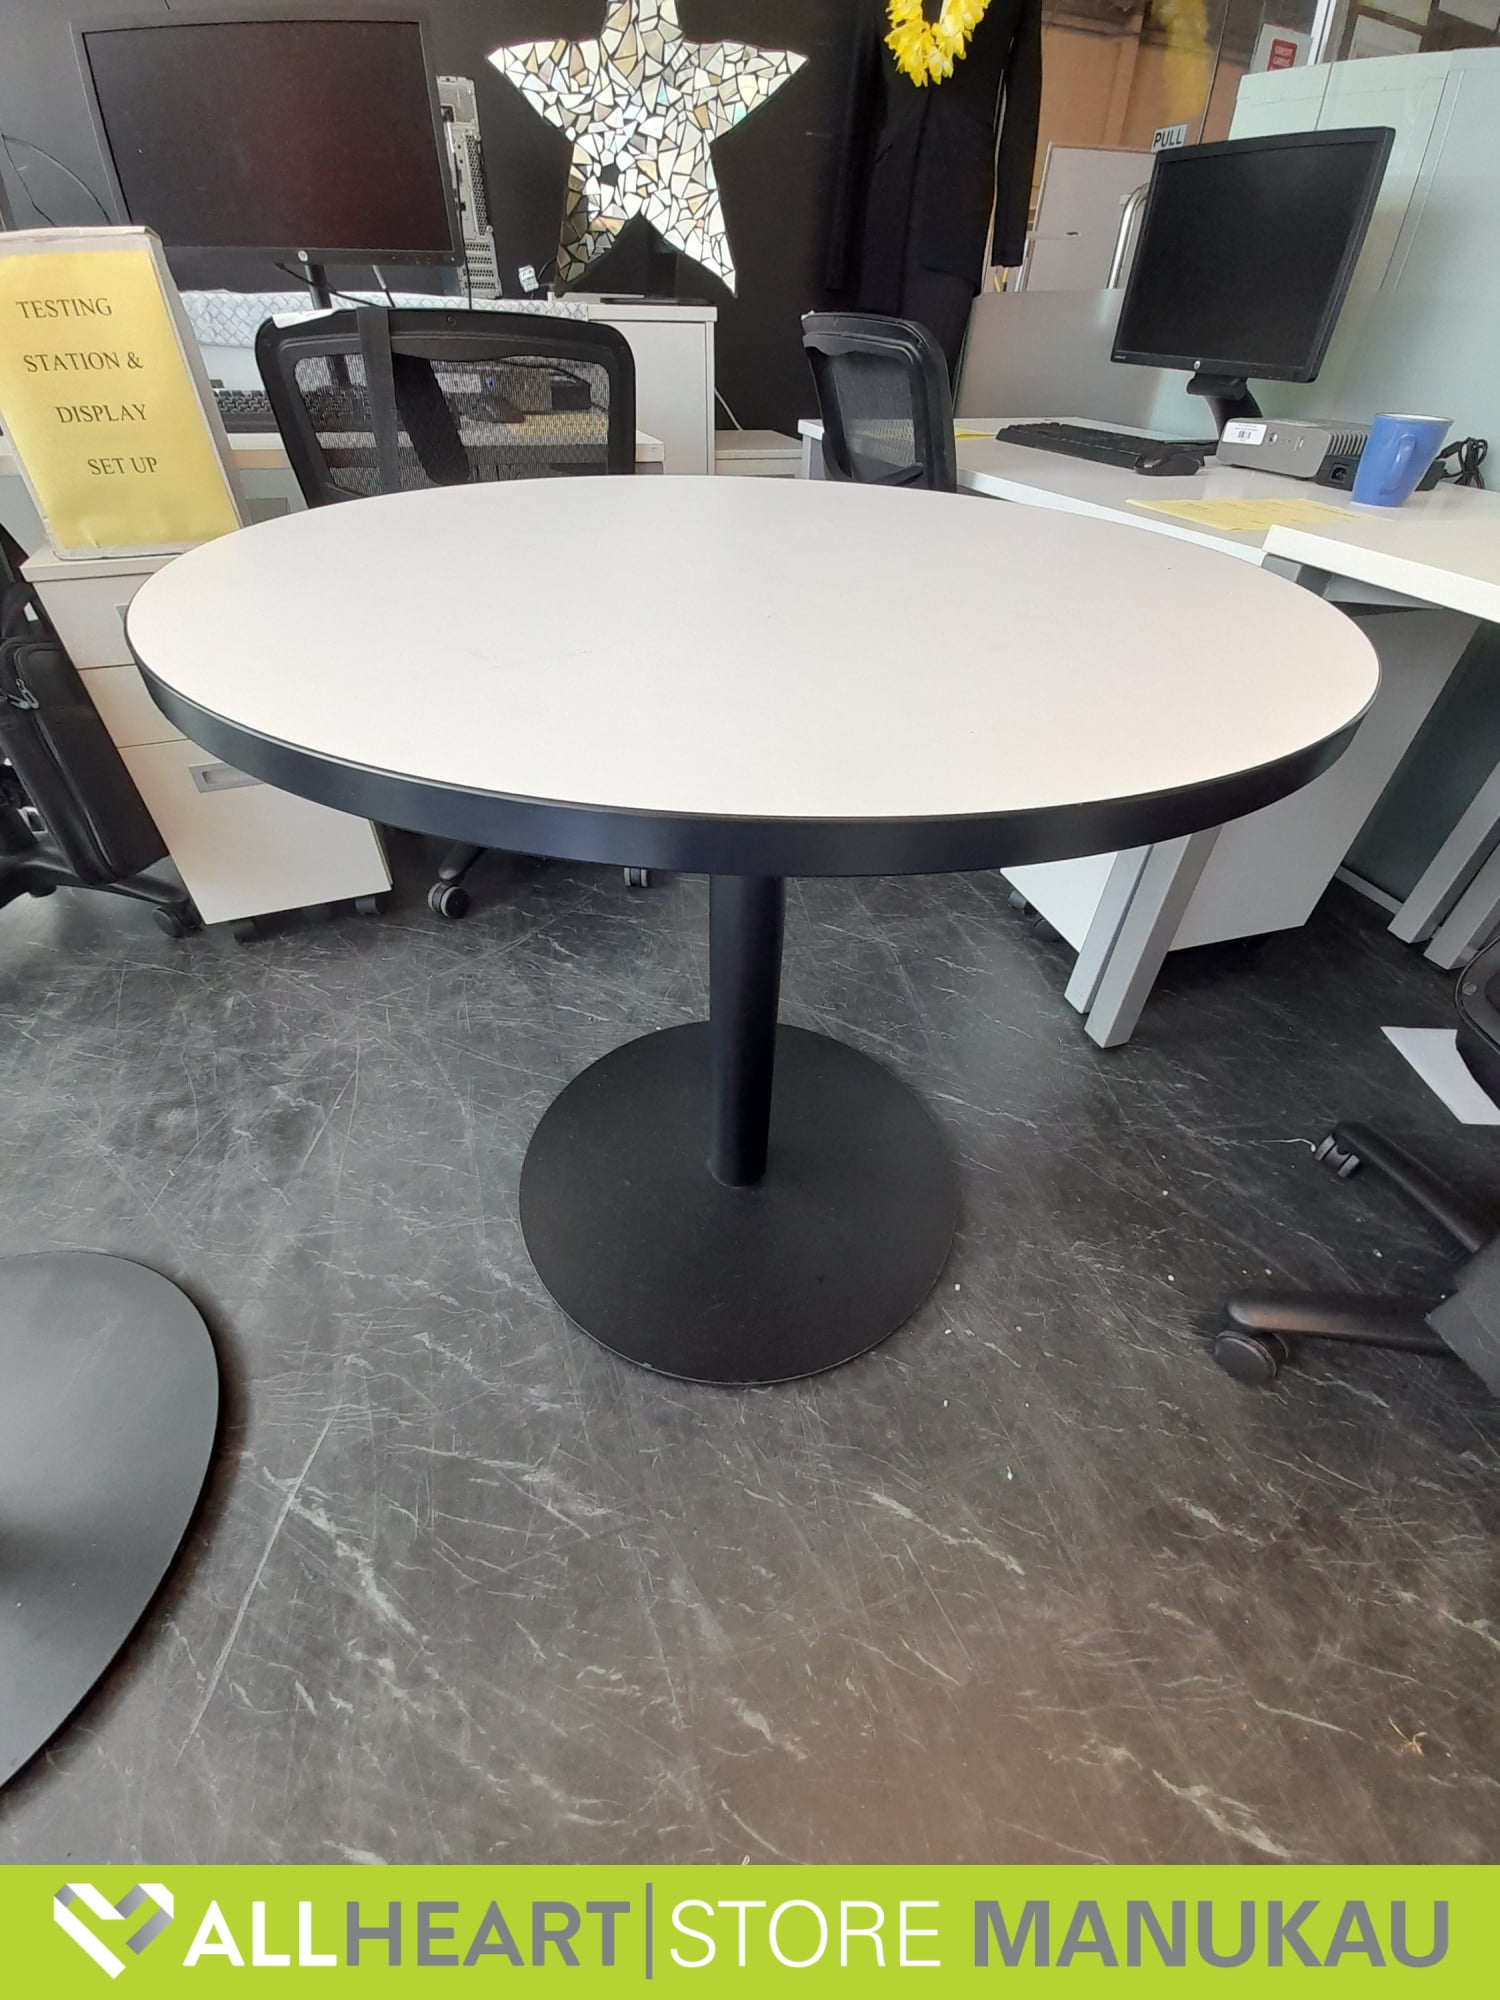 800mm DIA Round Table - White Table Top